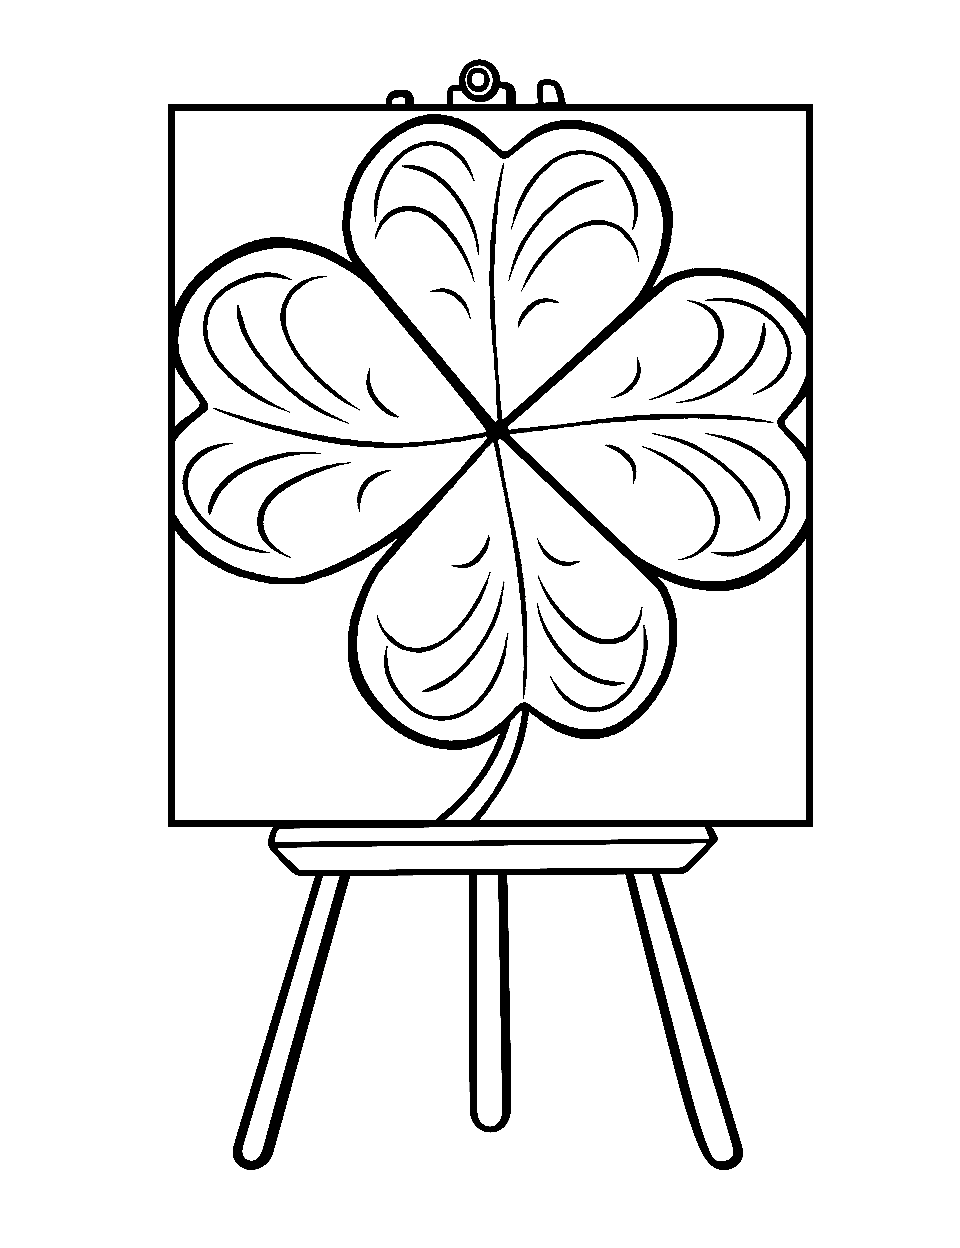 Art Easel with a Clover Painting Coloring Page - An easel displaying a beautiful painting of a clover.